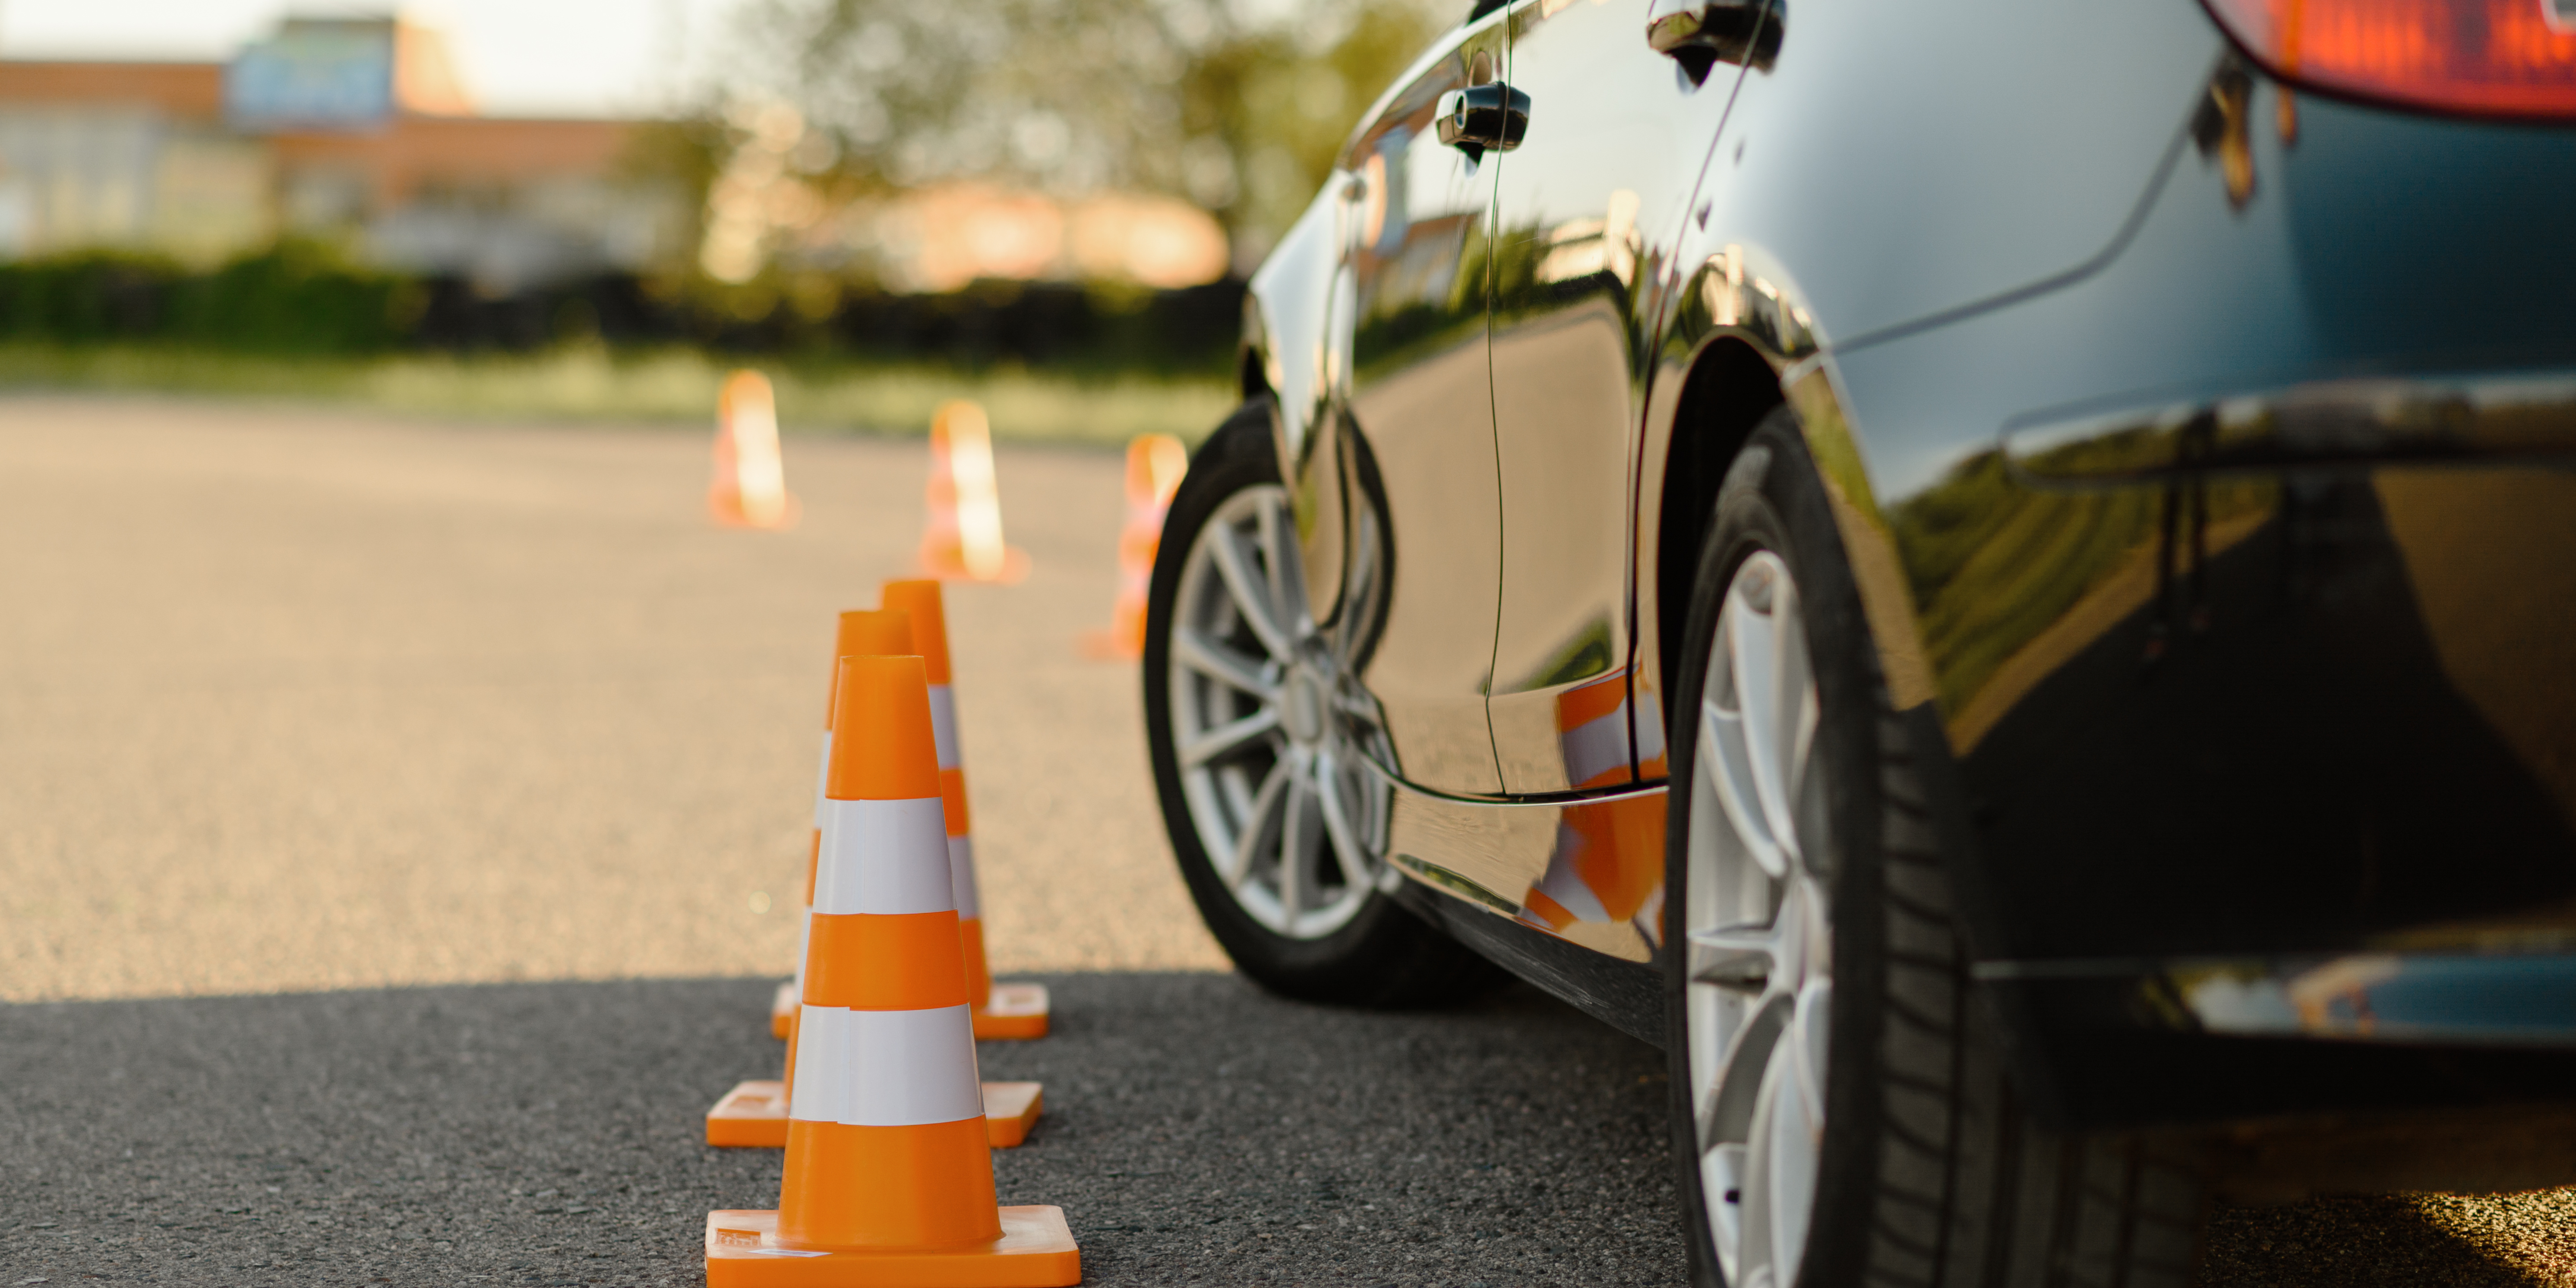 Novice Driver Risks: Why Behind-the-Wheel Training Matters